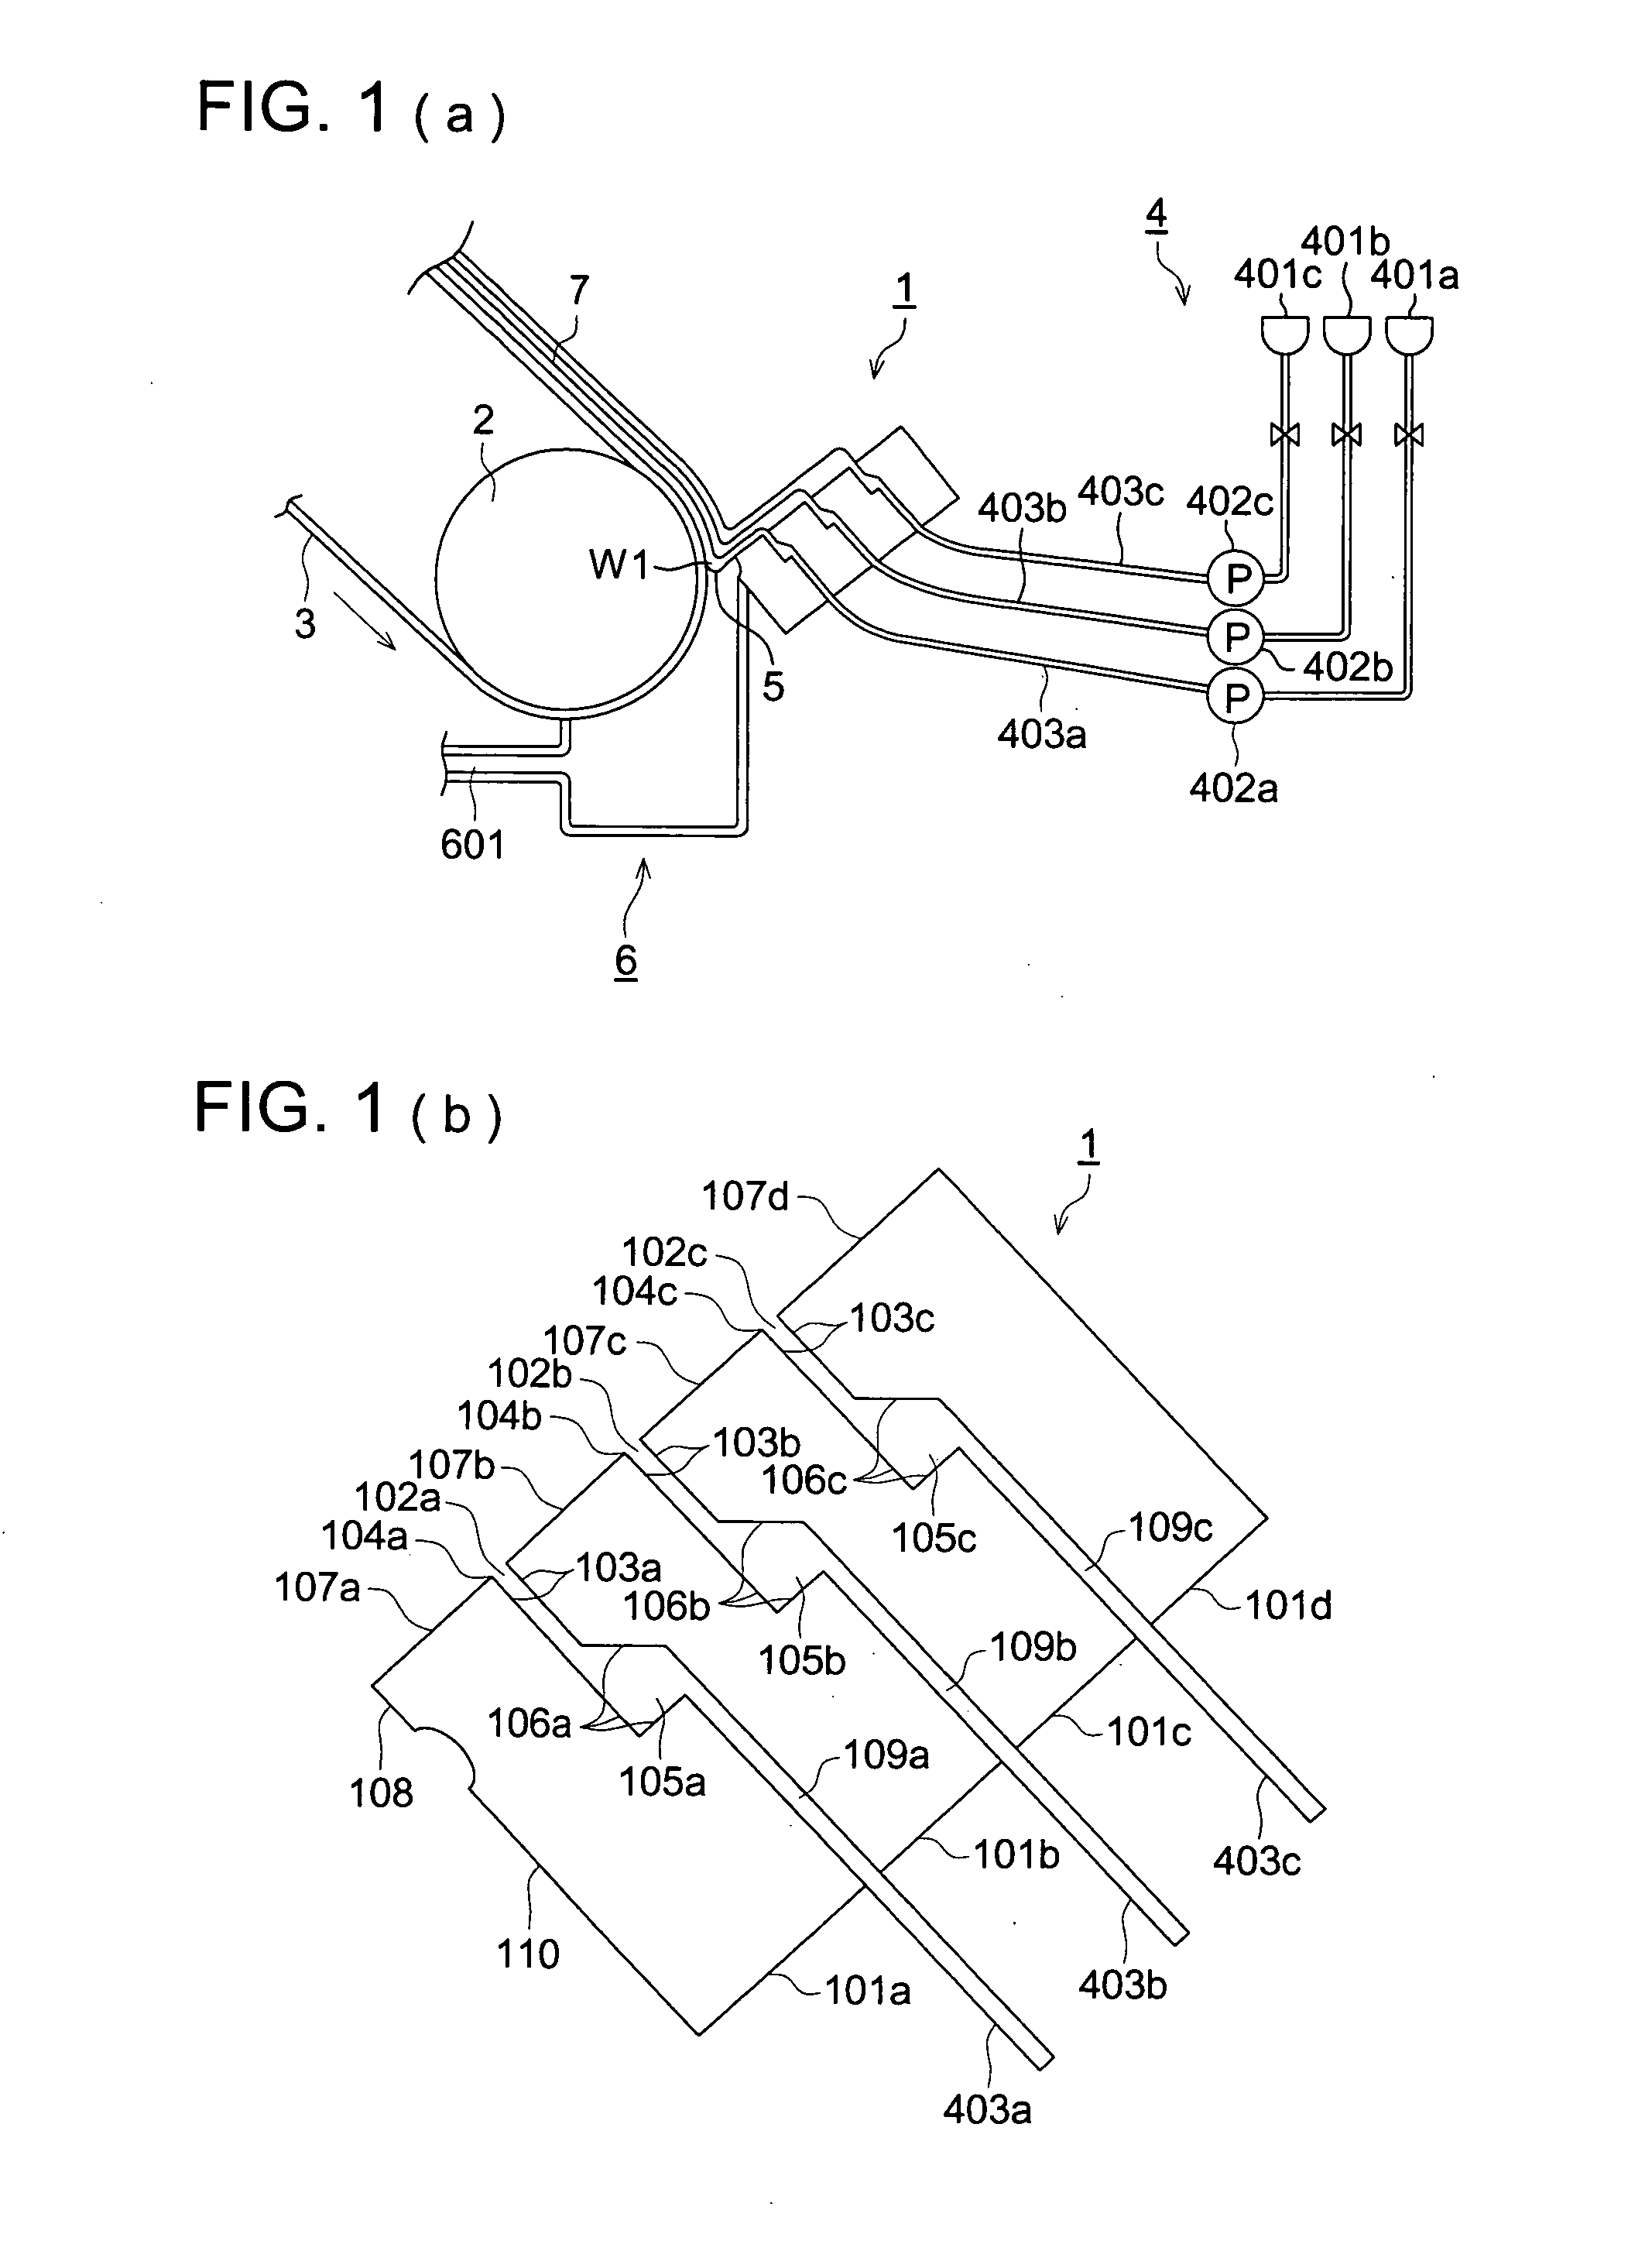 Producing method for die coater and coating apparatus